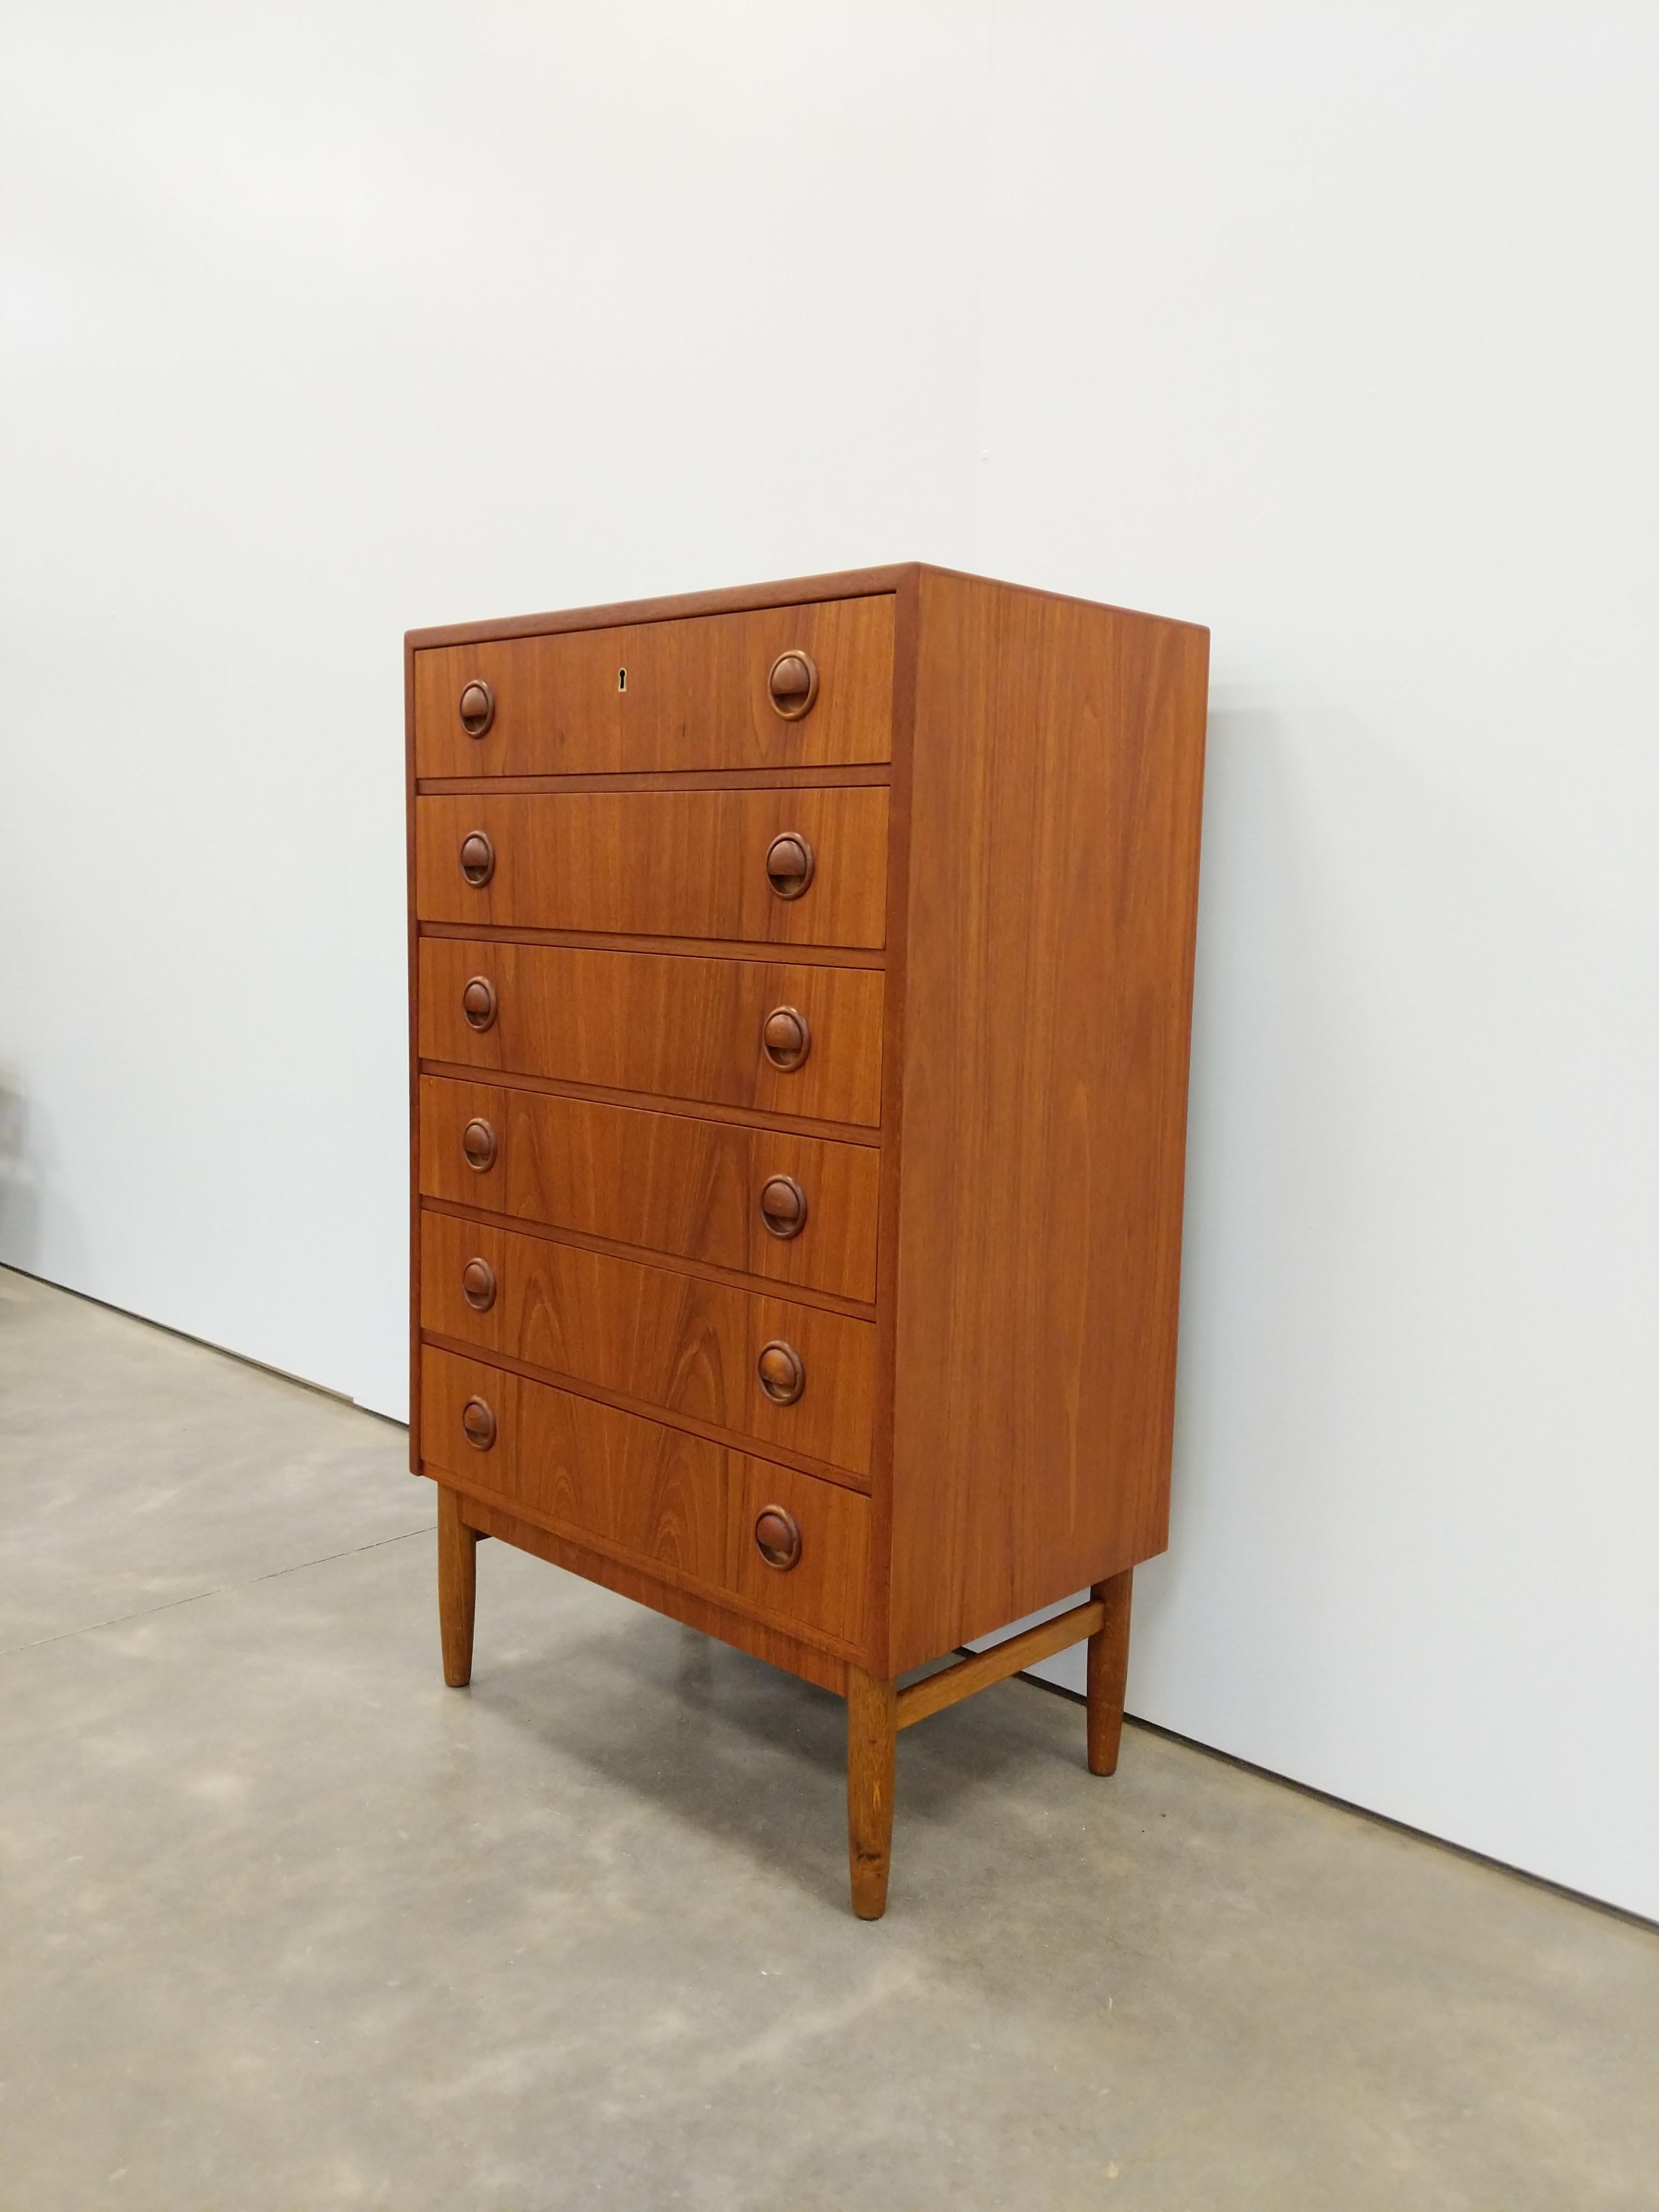 Authentic vintage mid century Danish / Scandinavian Modern teak dresser / chest of drawers.

Designed by Kai Kristiansen.

This piece is in excellent refinished condition with very few signs of age-related wear (see photos).

If you would like any